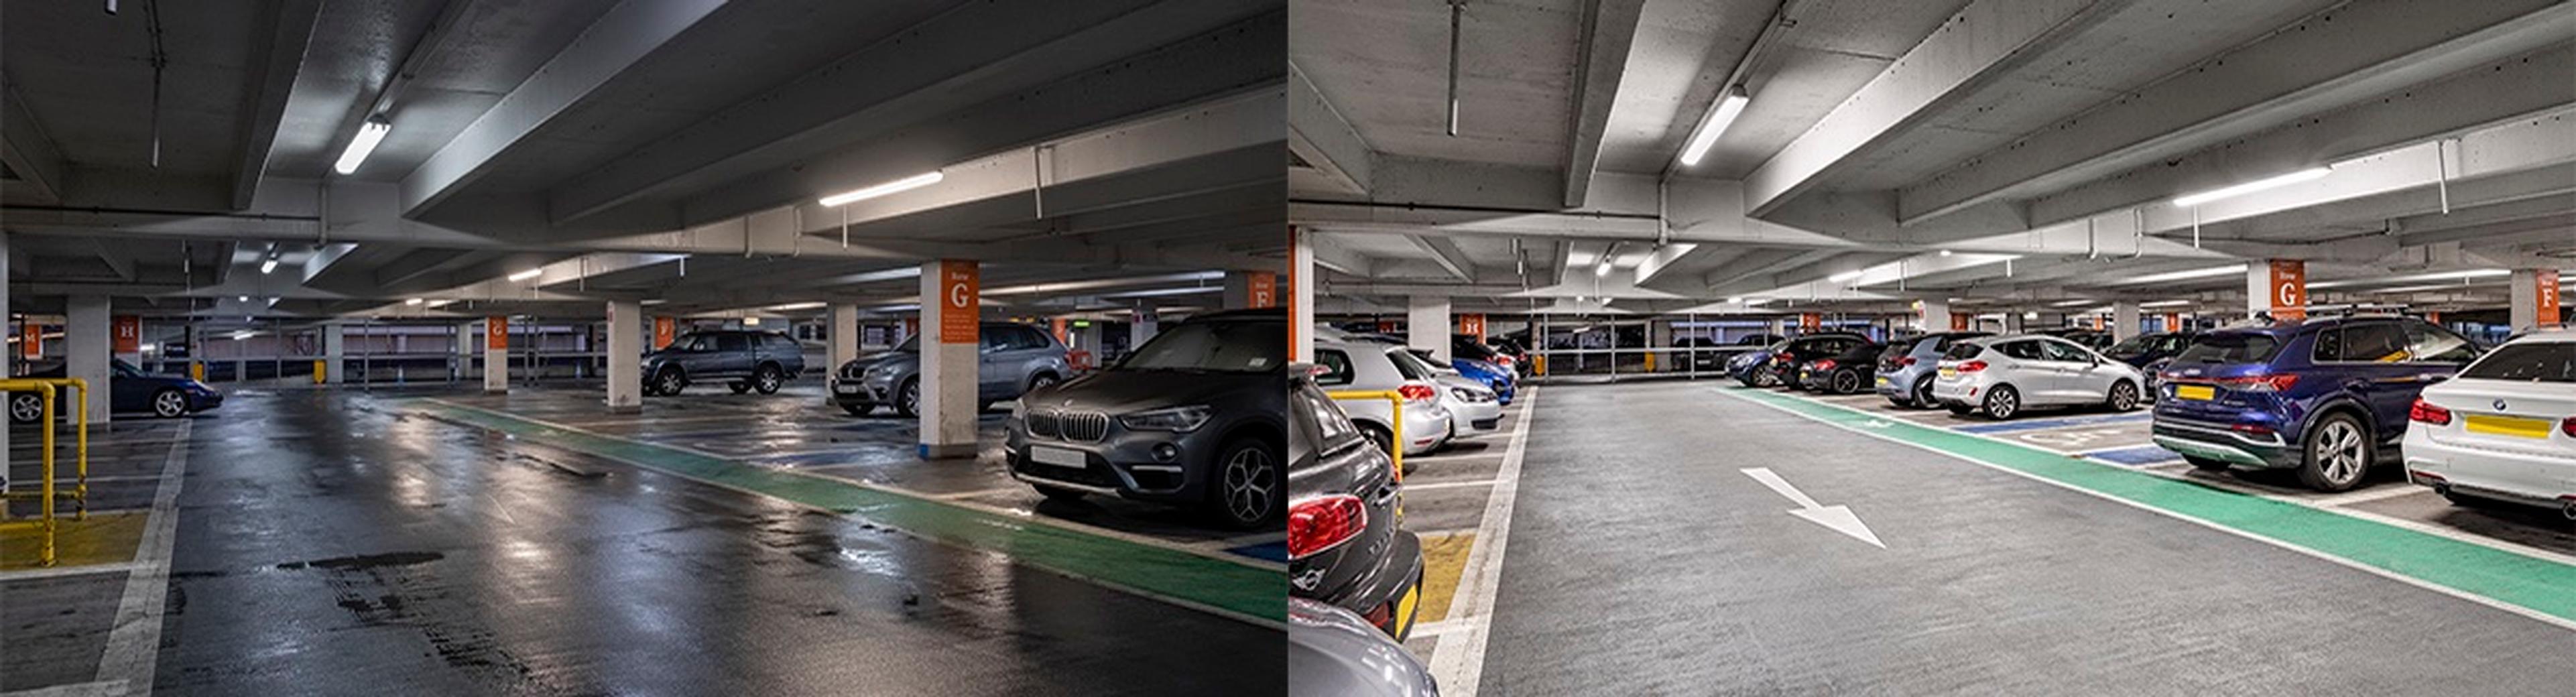 Gatwick`s South car park before and after the introduction of LED lighting